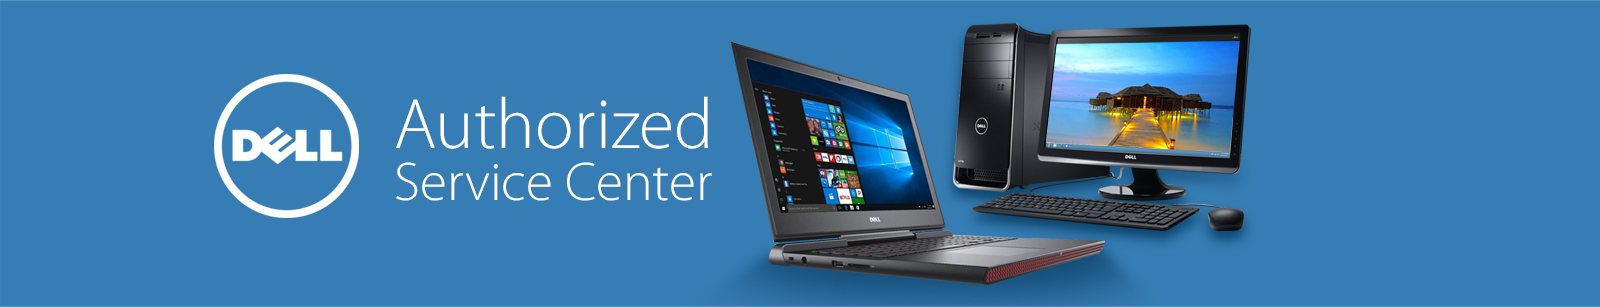 dell - authorised warranty and out of warranty service center in  kochi/trivandrum